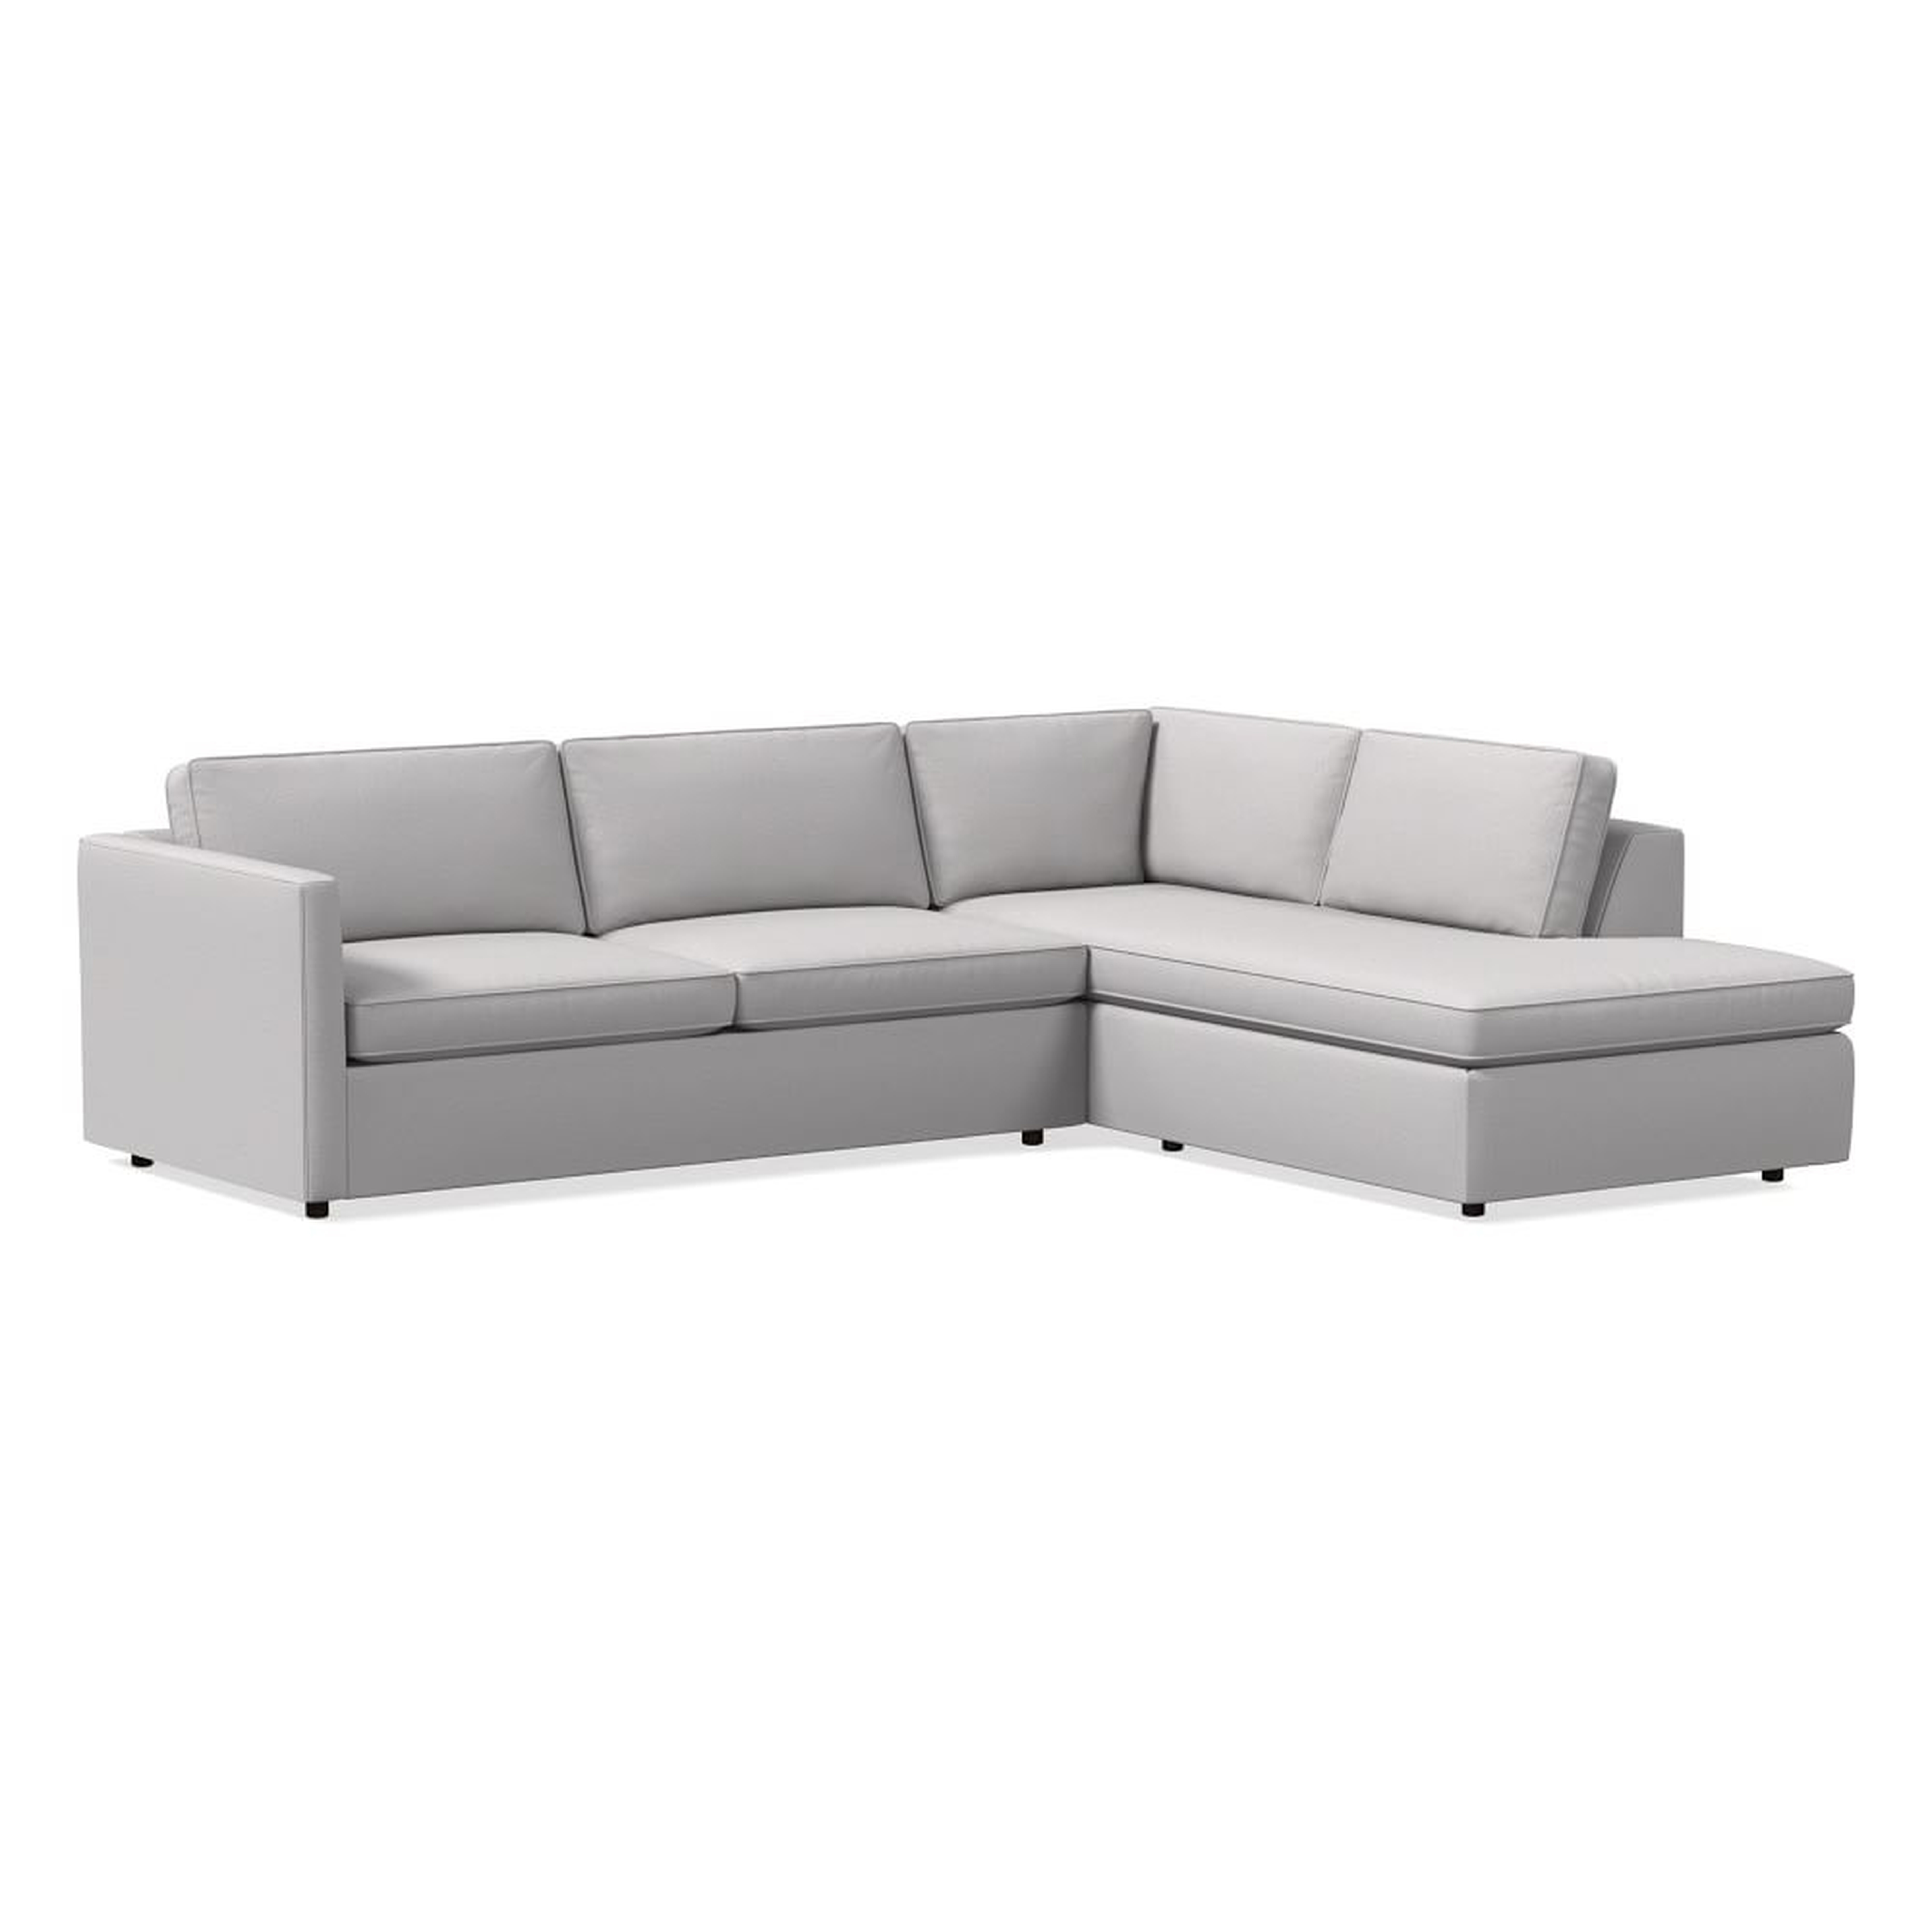 Harris 112" Right Multi-Seat Sleeper Sectional w/ Bumper Chaise, Chenille Tweed, Frost Gray - West Elm